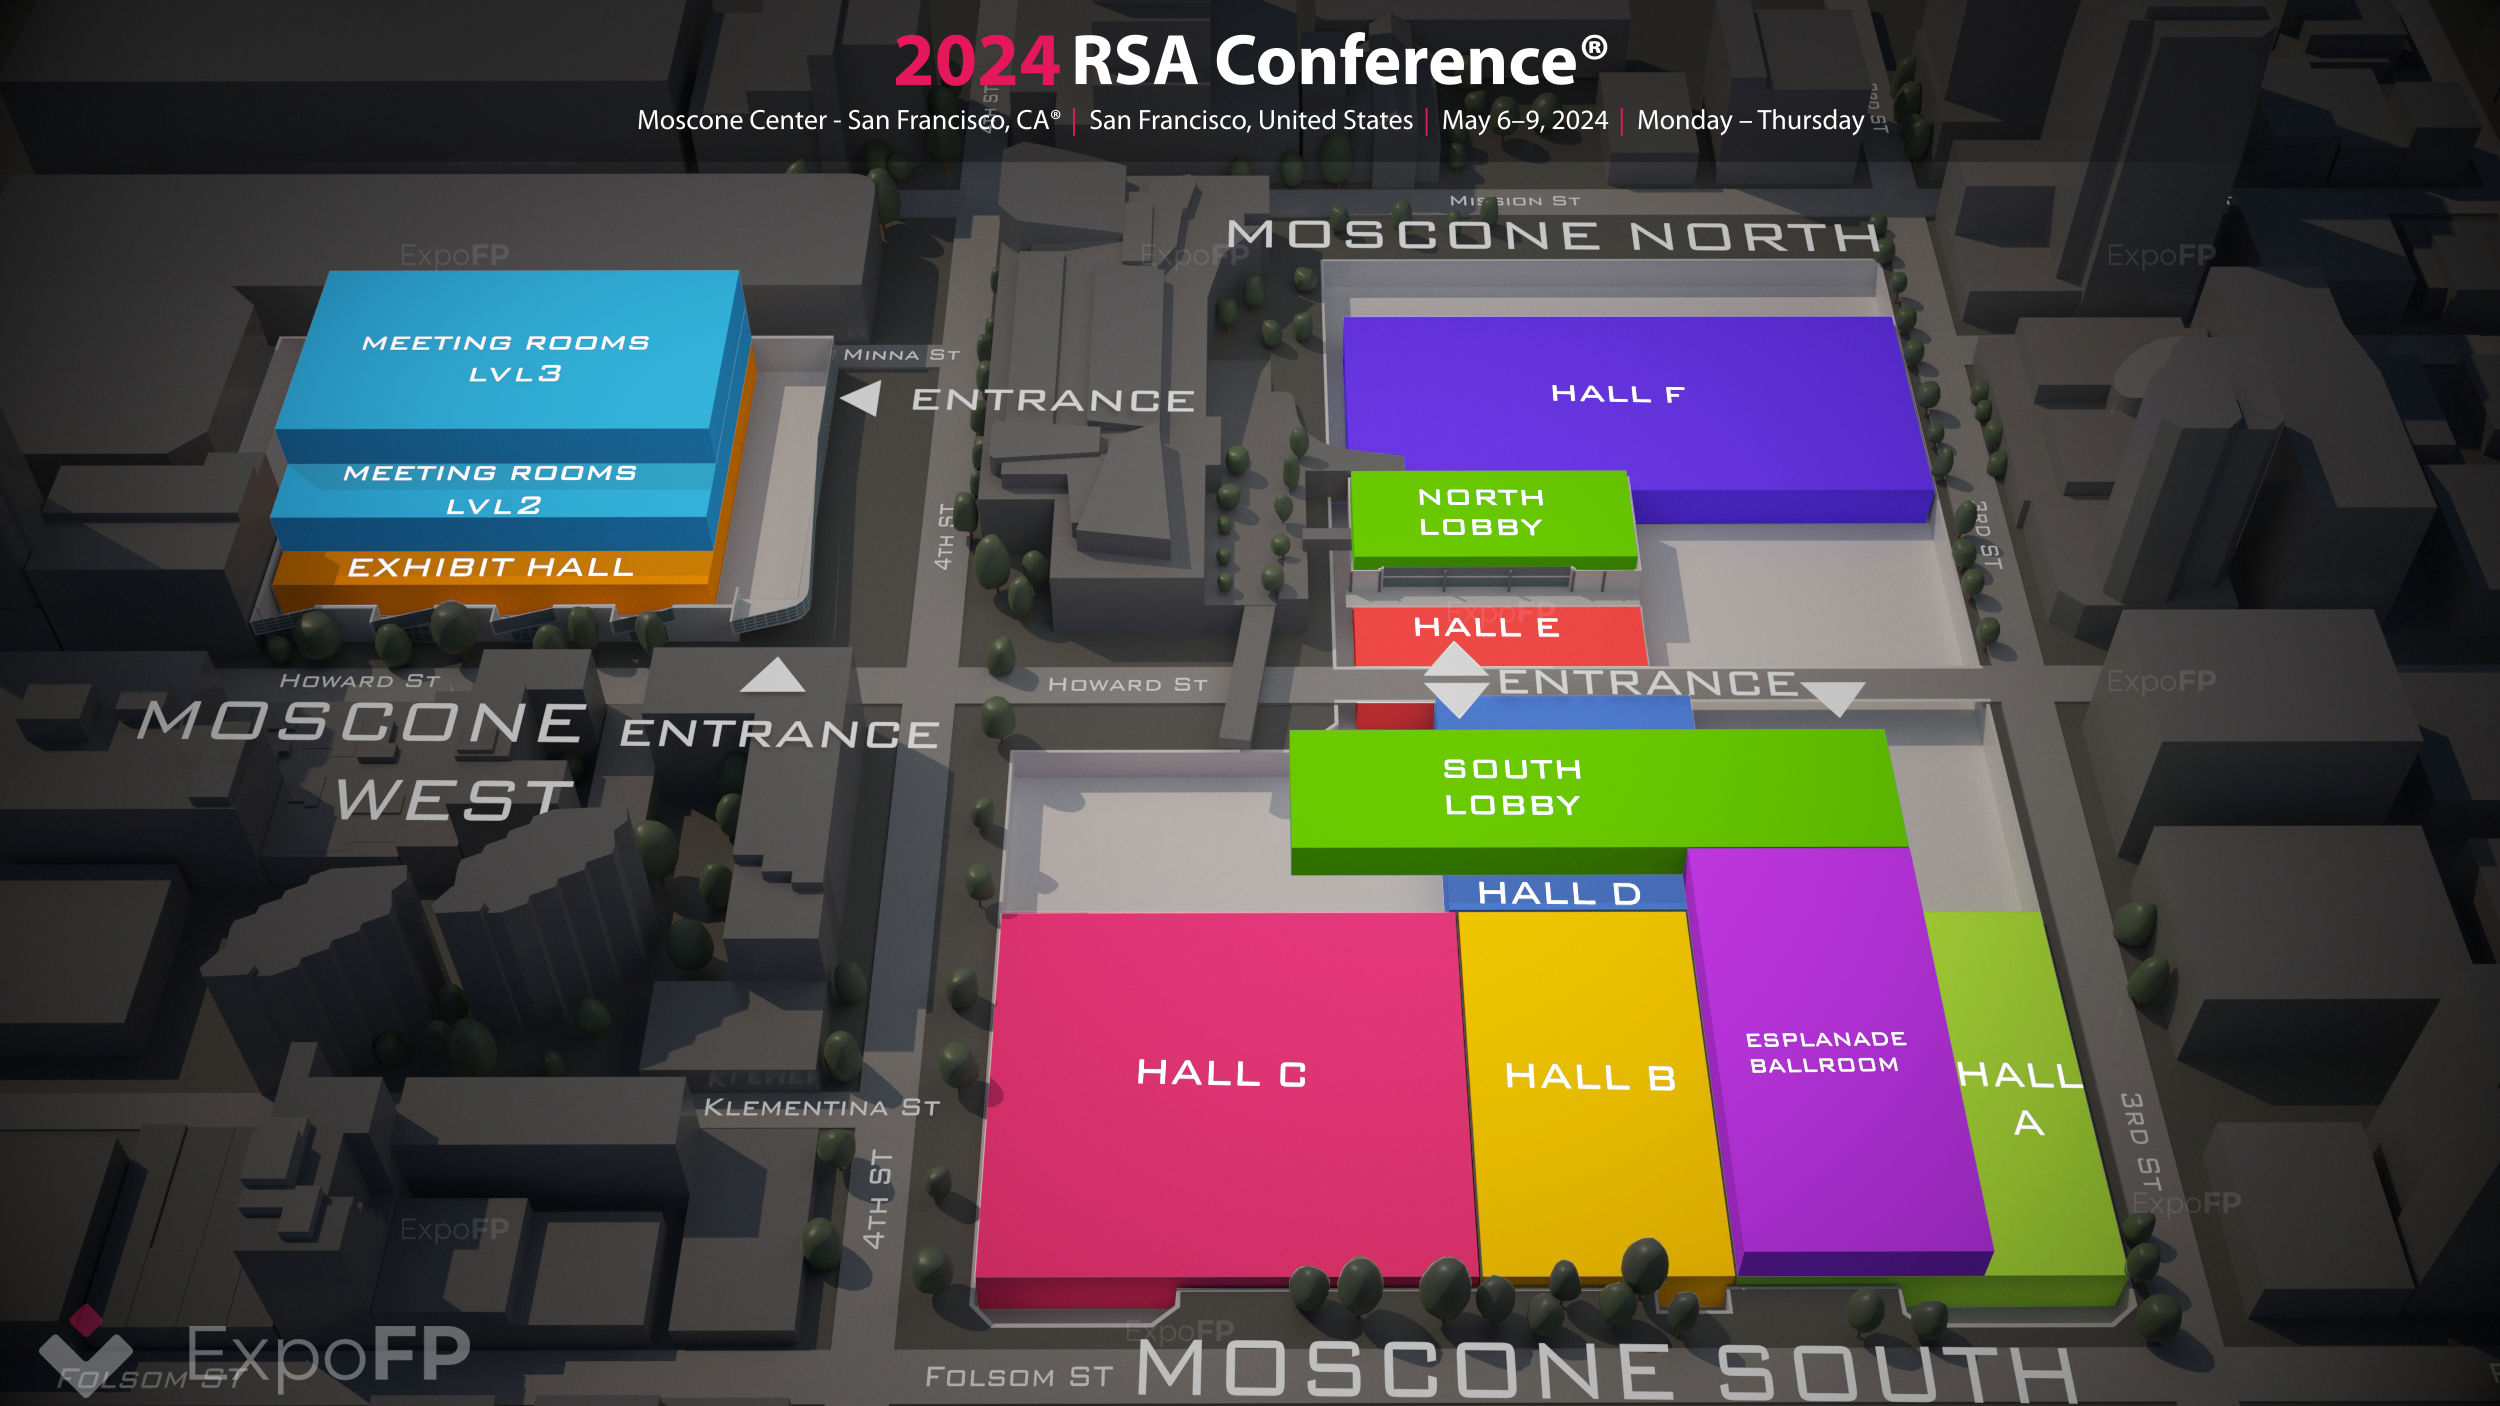 RSA Conference 2024 in Moscone Center San Francisco, CA